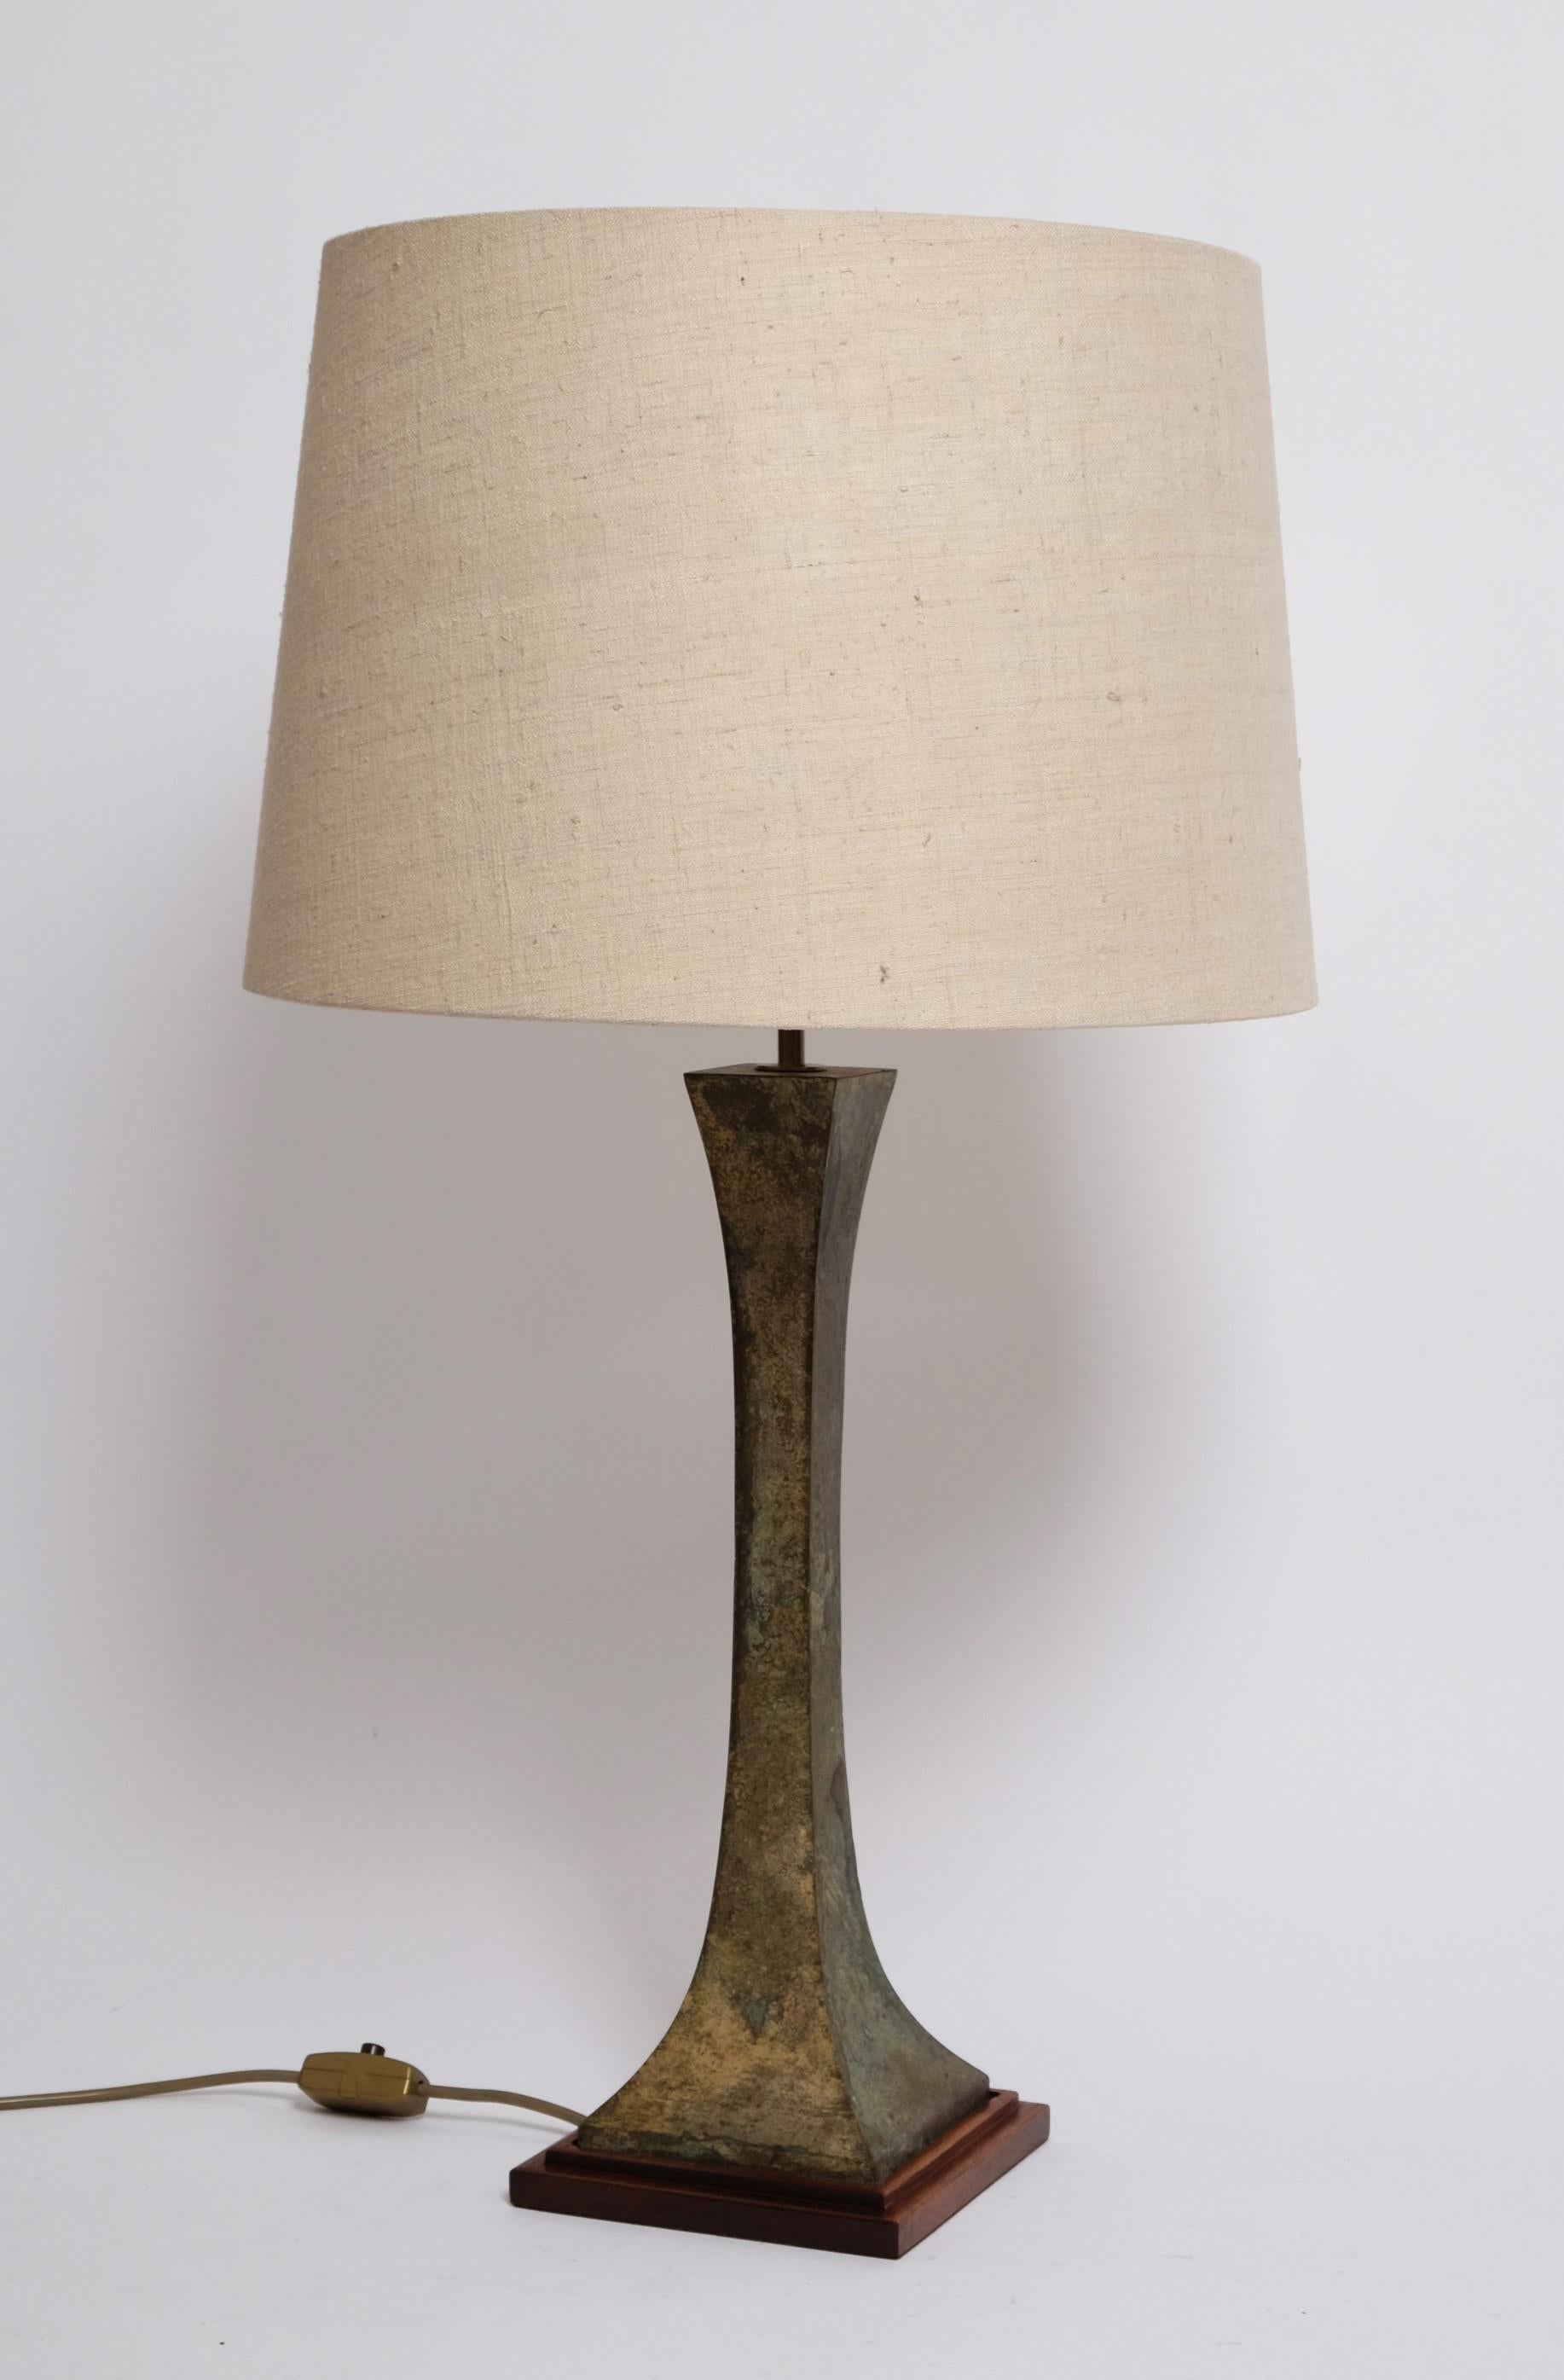 Exceptional Mid-Century Modern bronze Verdigris table lamp. Designed by Stewart Ross James and manufactured by Hansen Lighting, USA 1960s.

The piece is in a wonderful vintage and 100% original condition. Lampshade with slight signs of